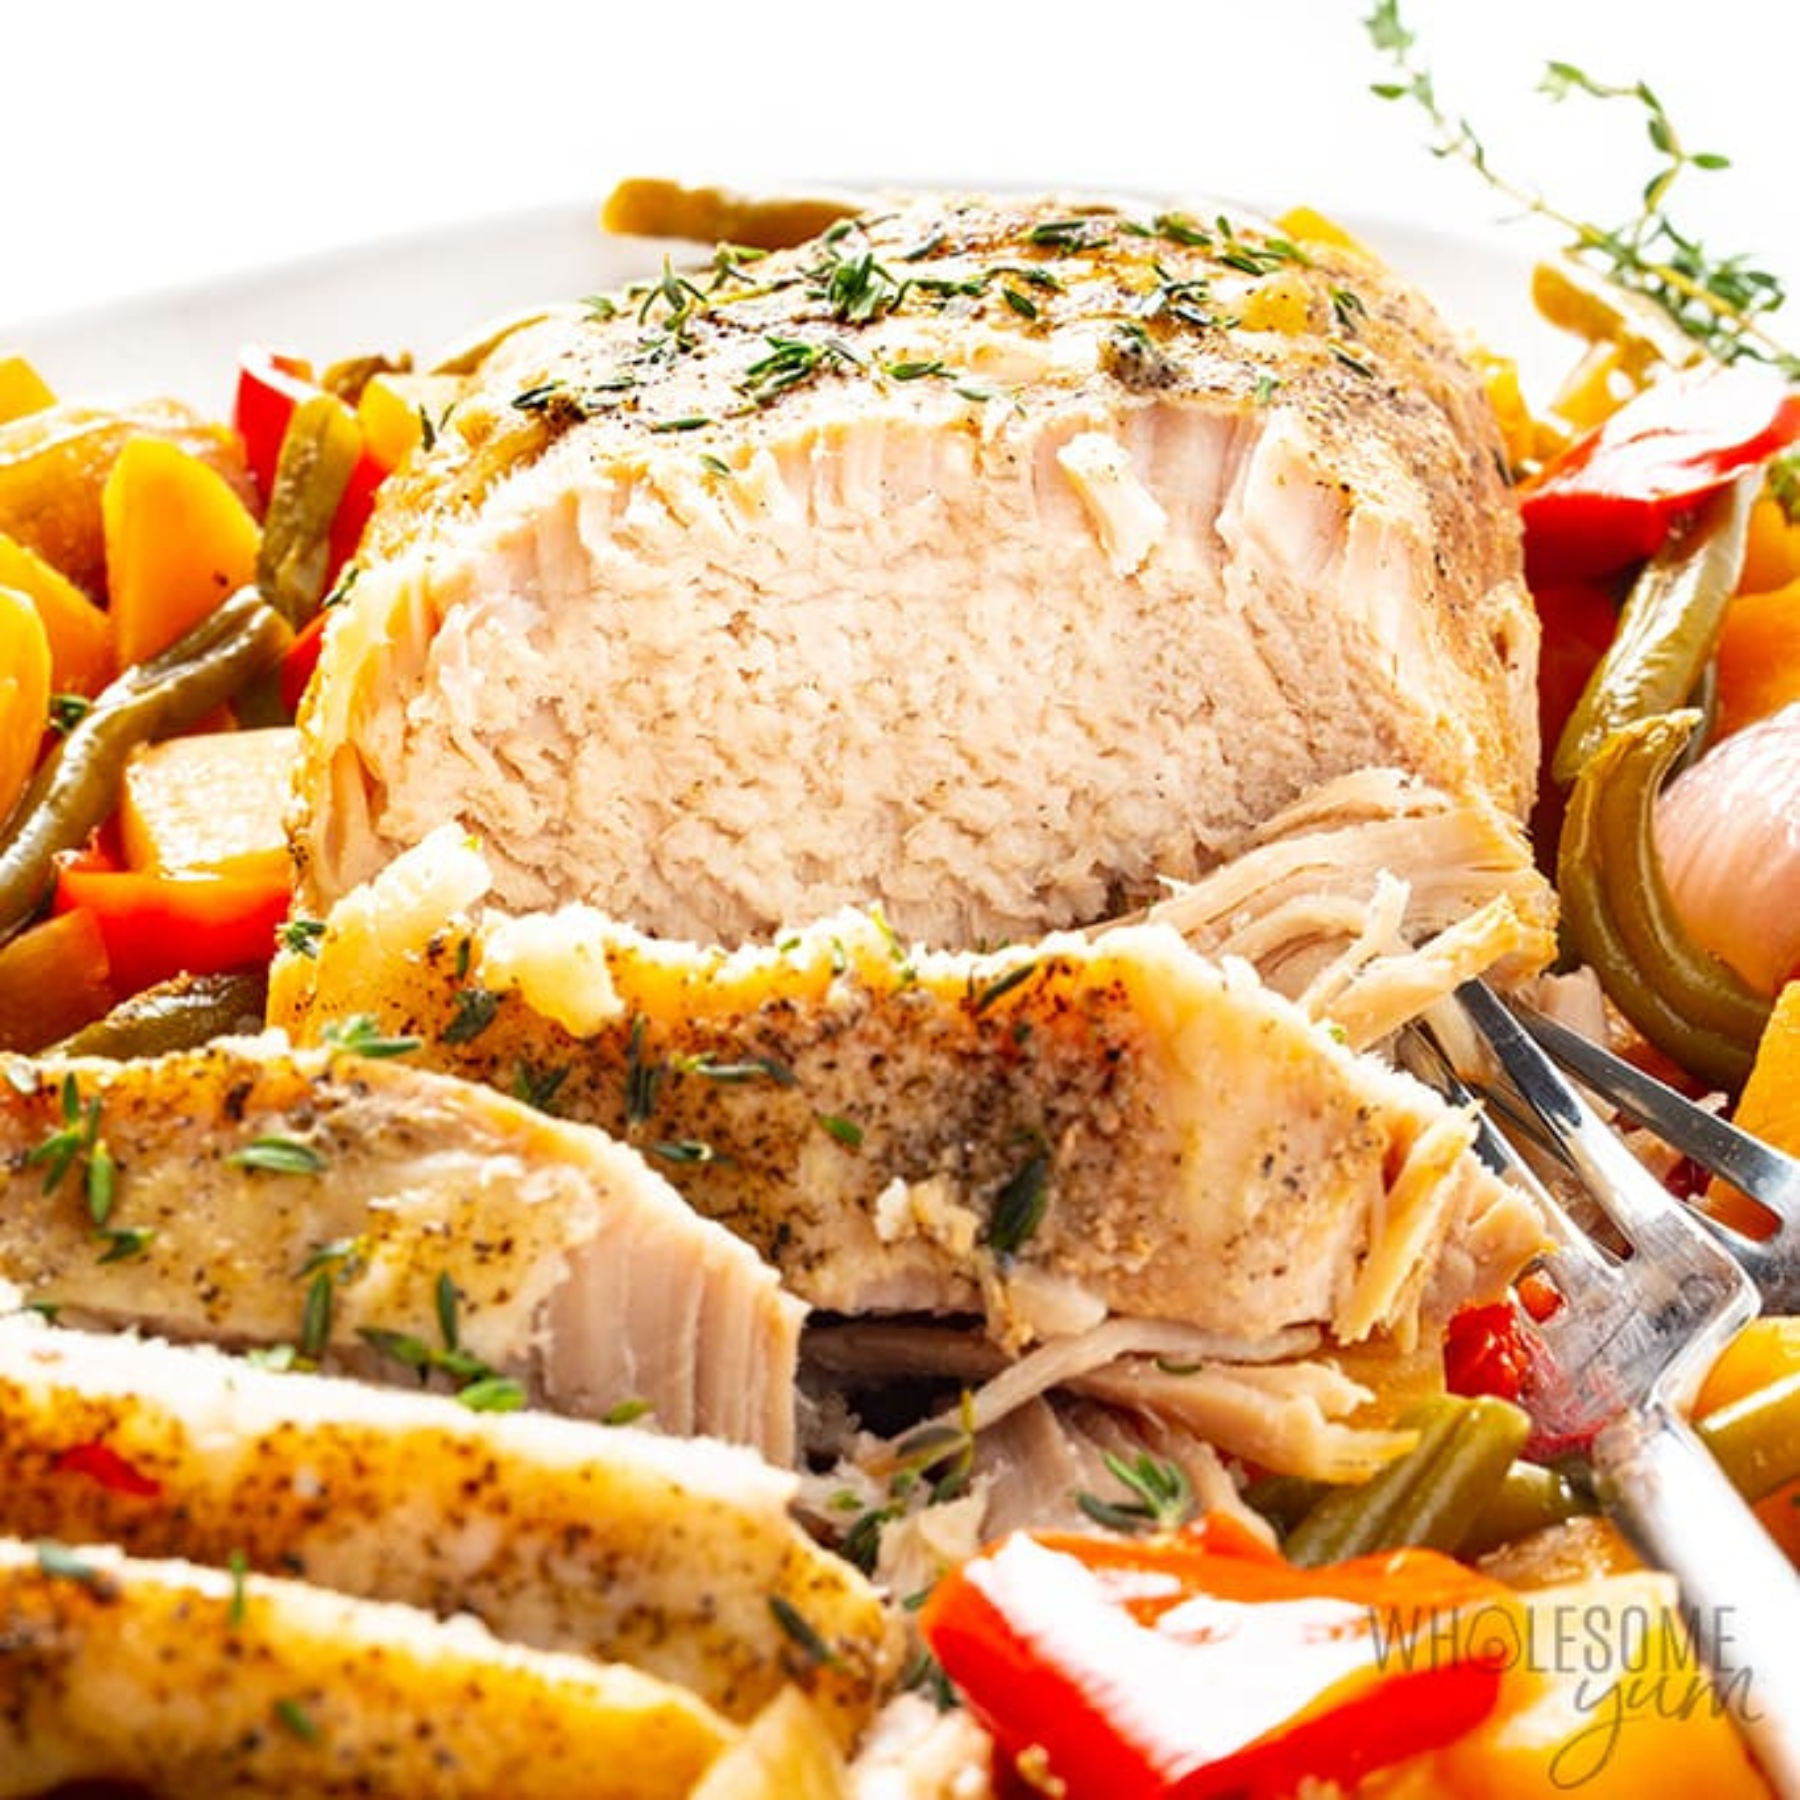 Herb roasted pork loin with vegetables.